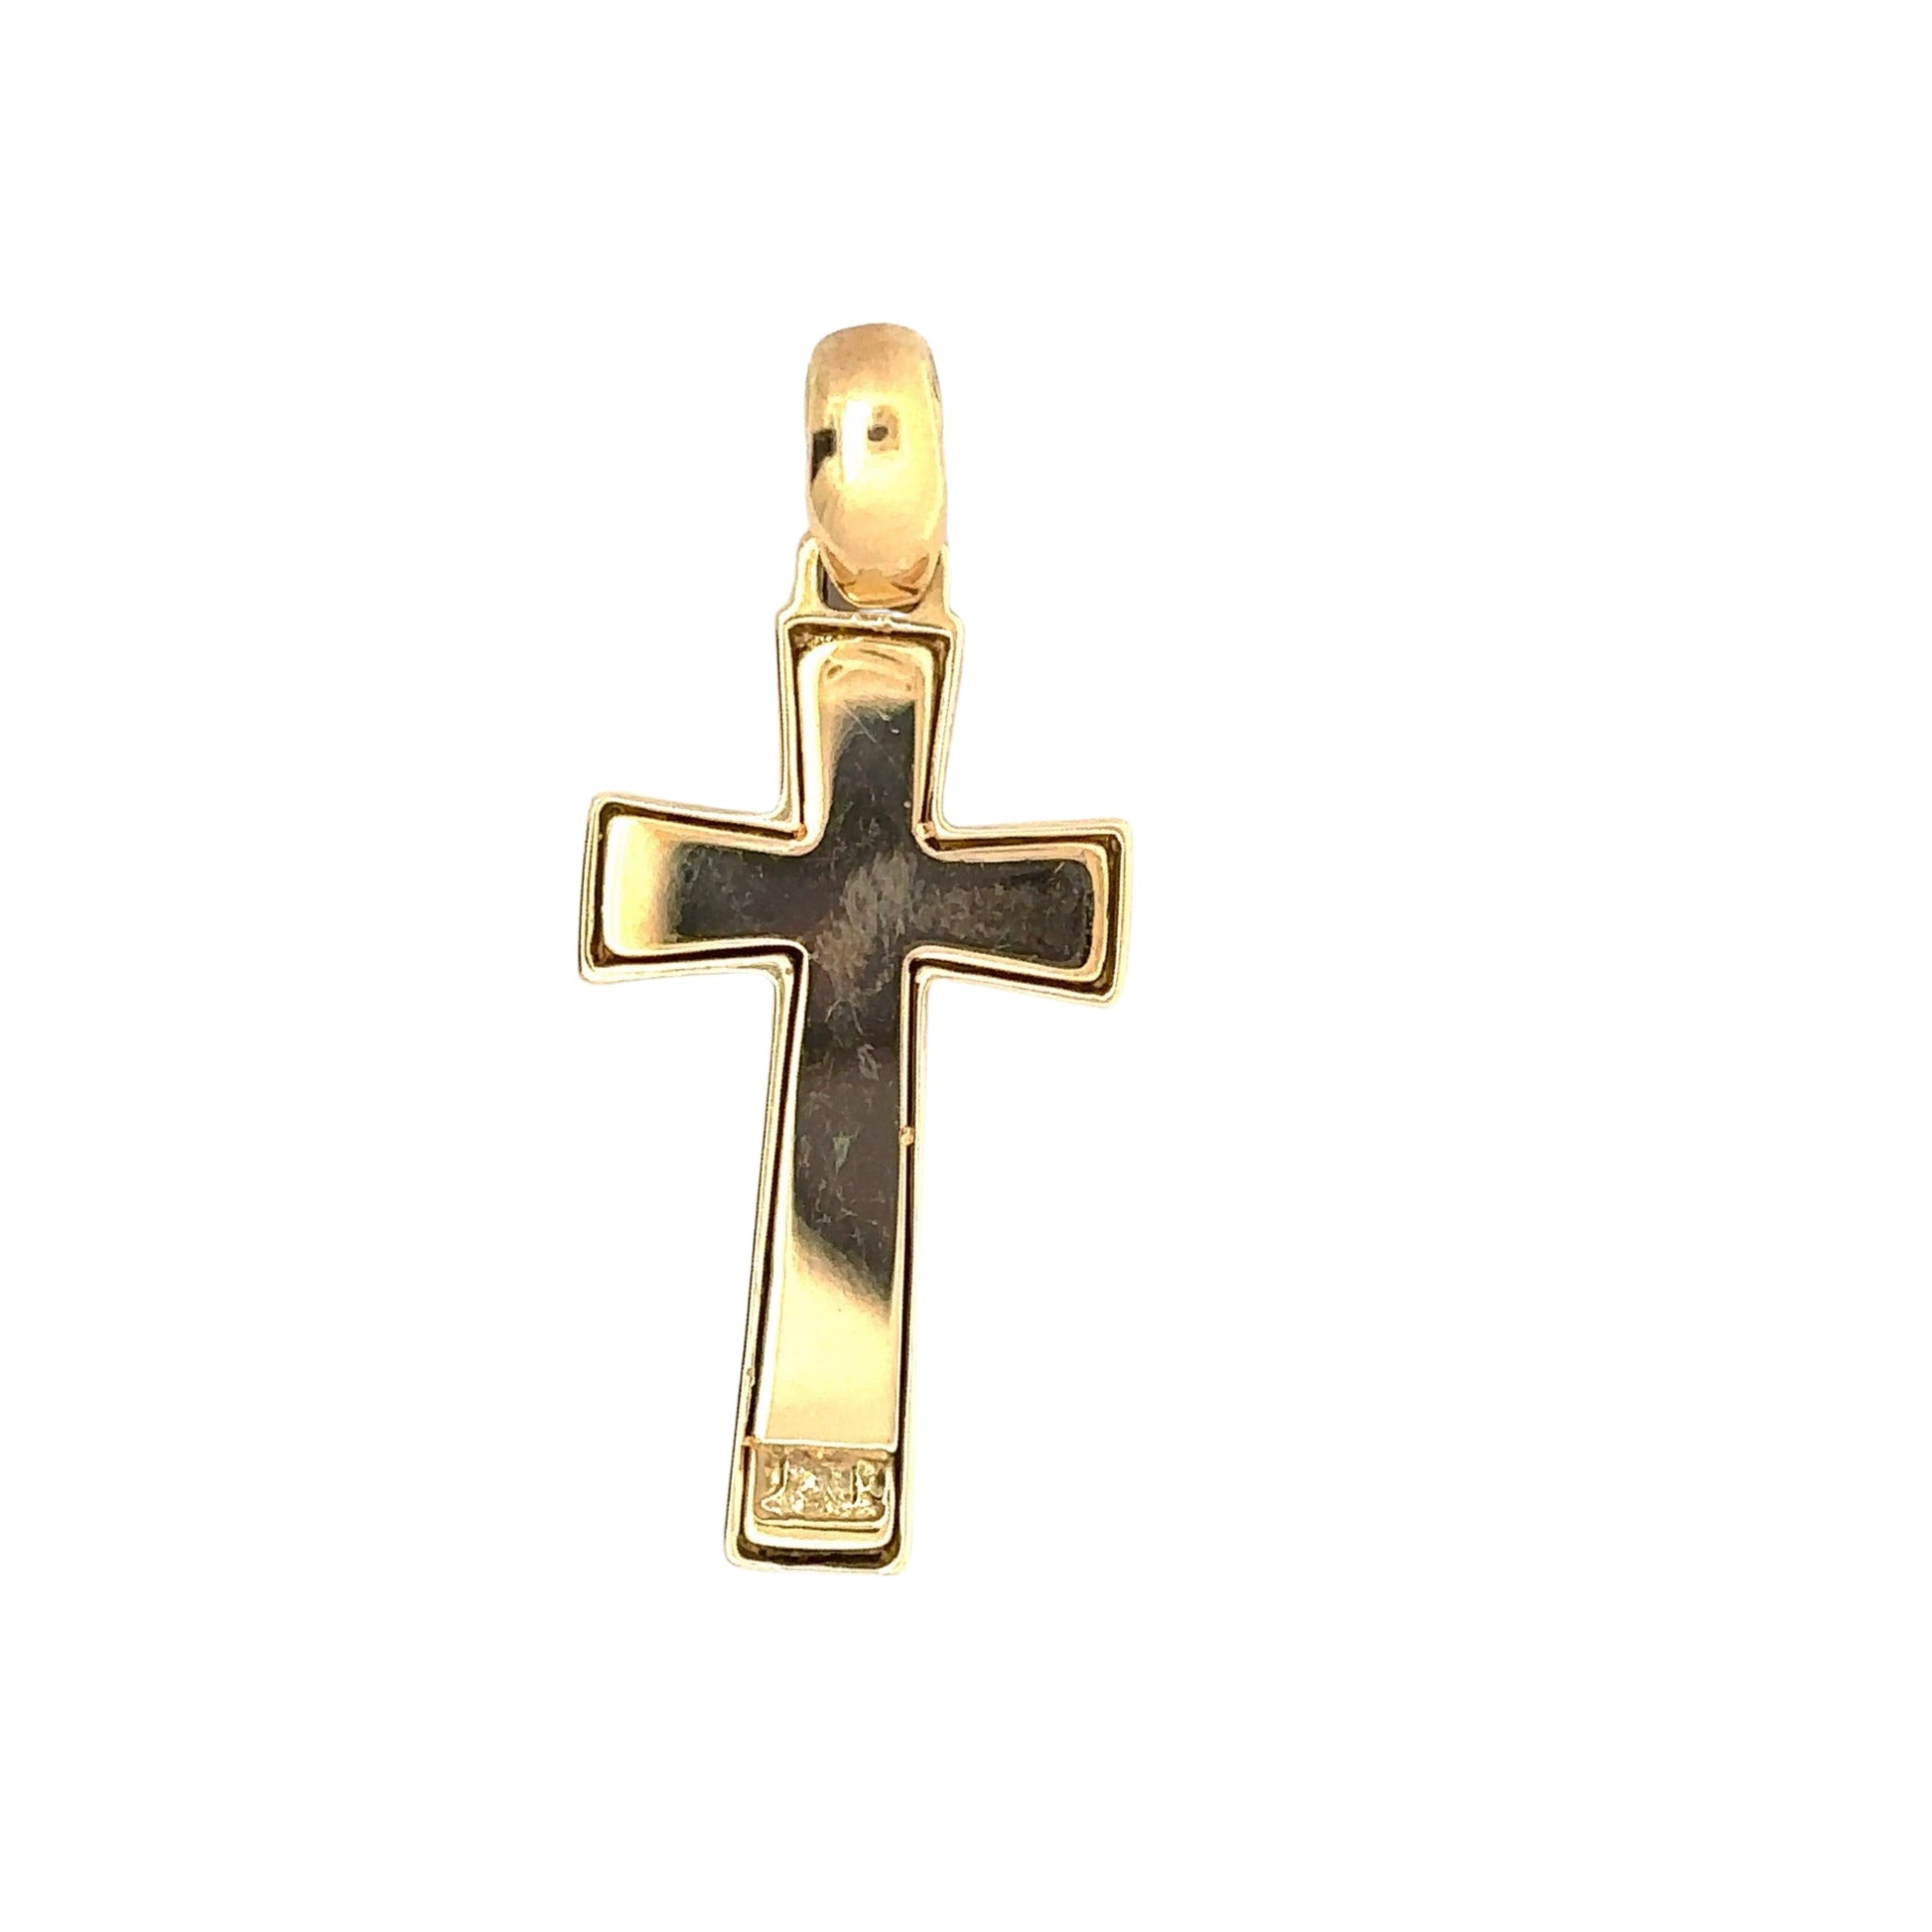 Back of yellow gold cross with scratches